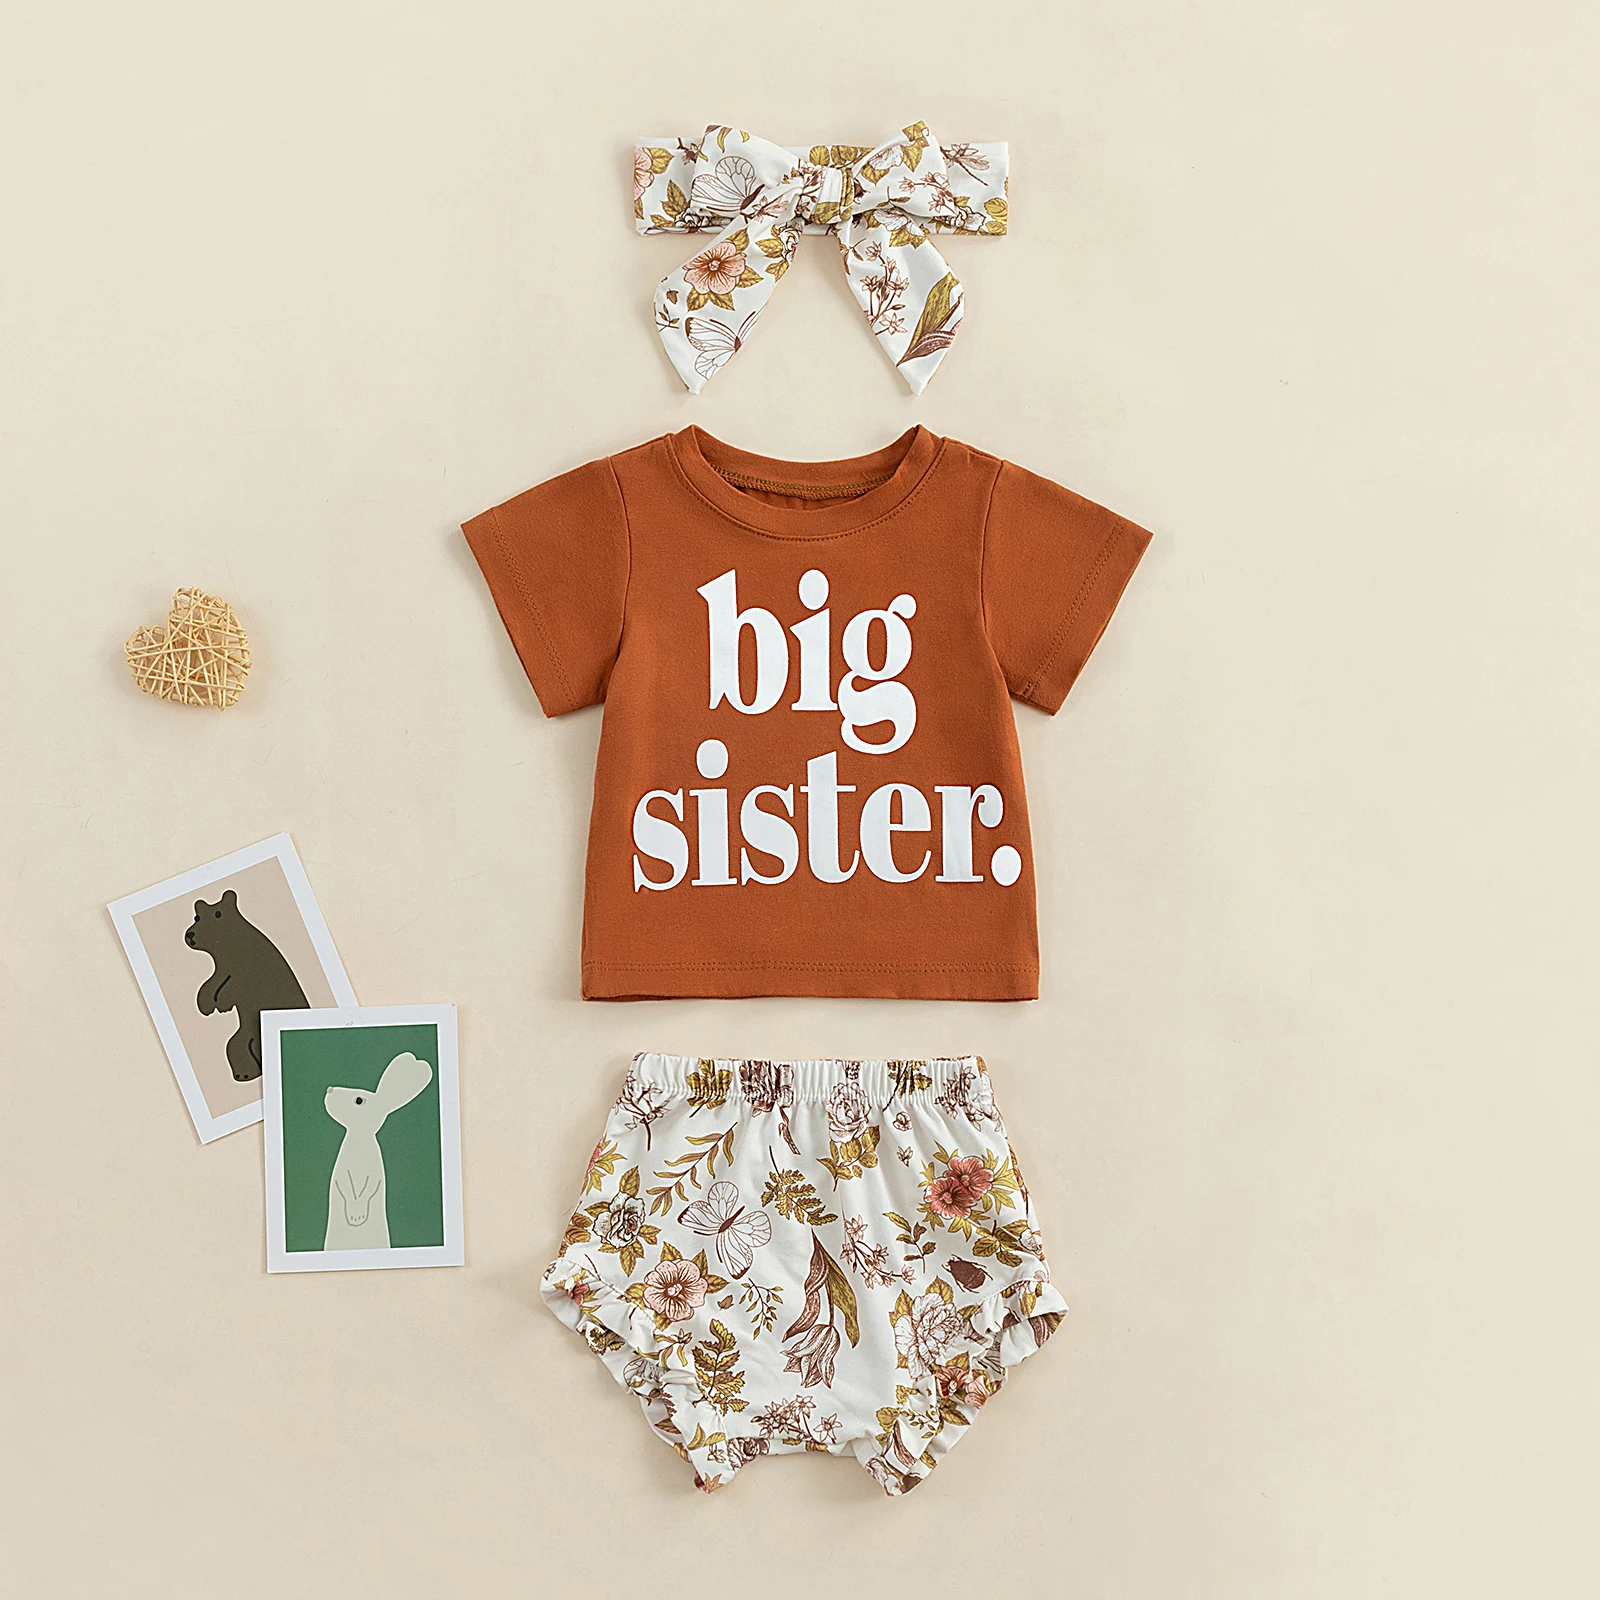 baby clothes in sets	 2022 0-24M Infant Baby Girl Clothing BIG/LITTLE SISTER Letter Print Round Neck Short Sleeve T-shirt+Floral Triangle Shorts 3pcs Baby Clothing Set comfotable